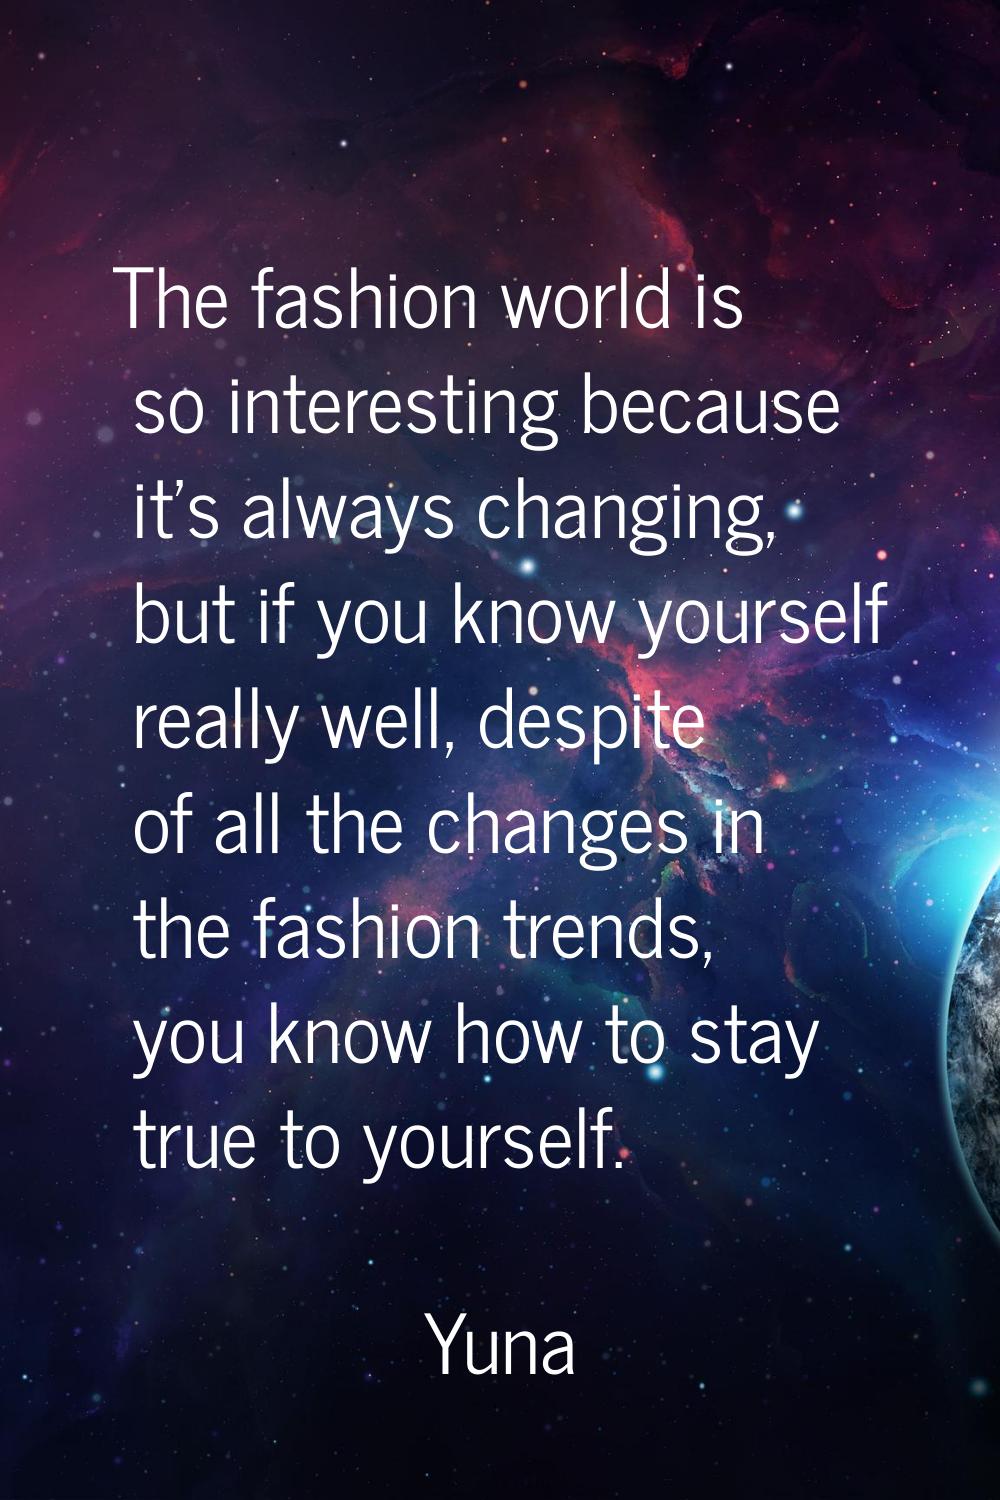 The fashion world is so interesting because it's always changing, but if you know yourself really w